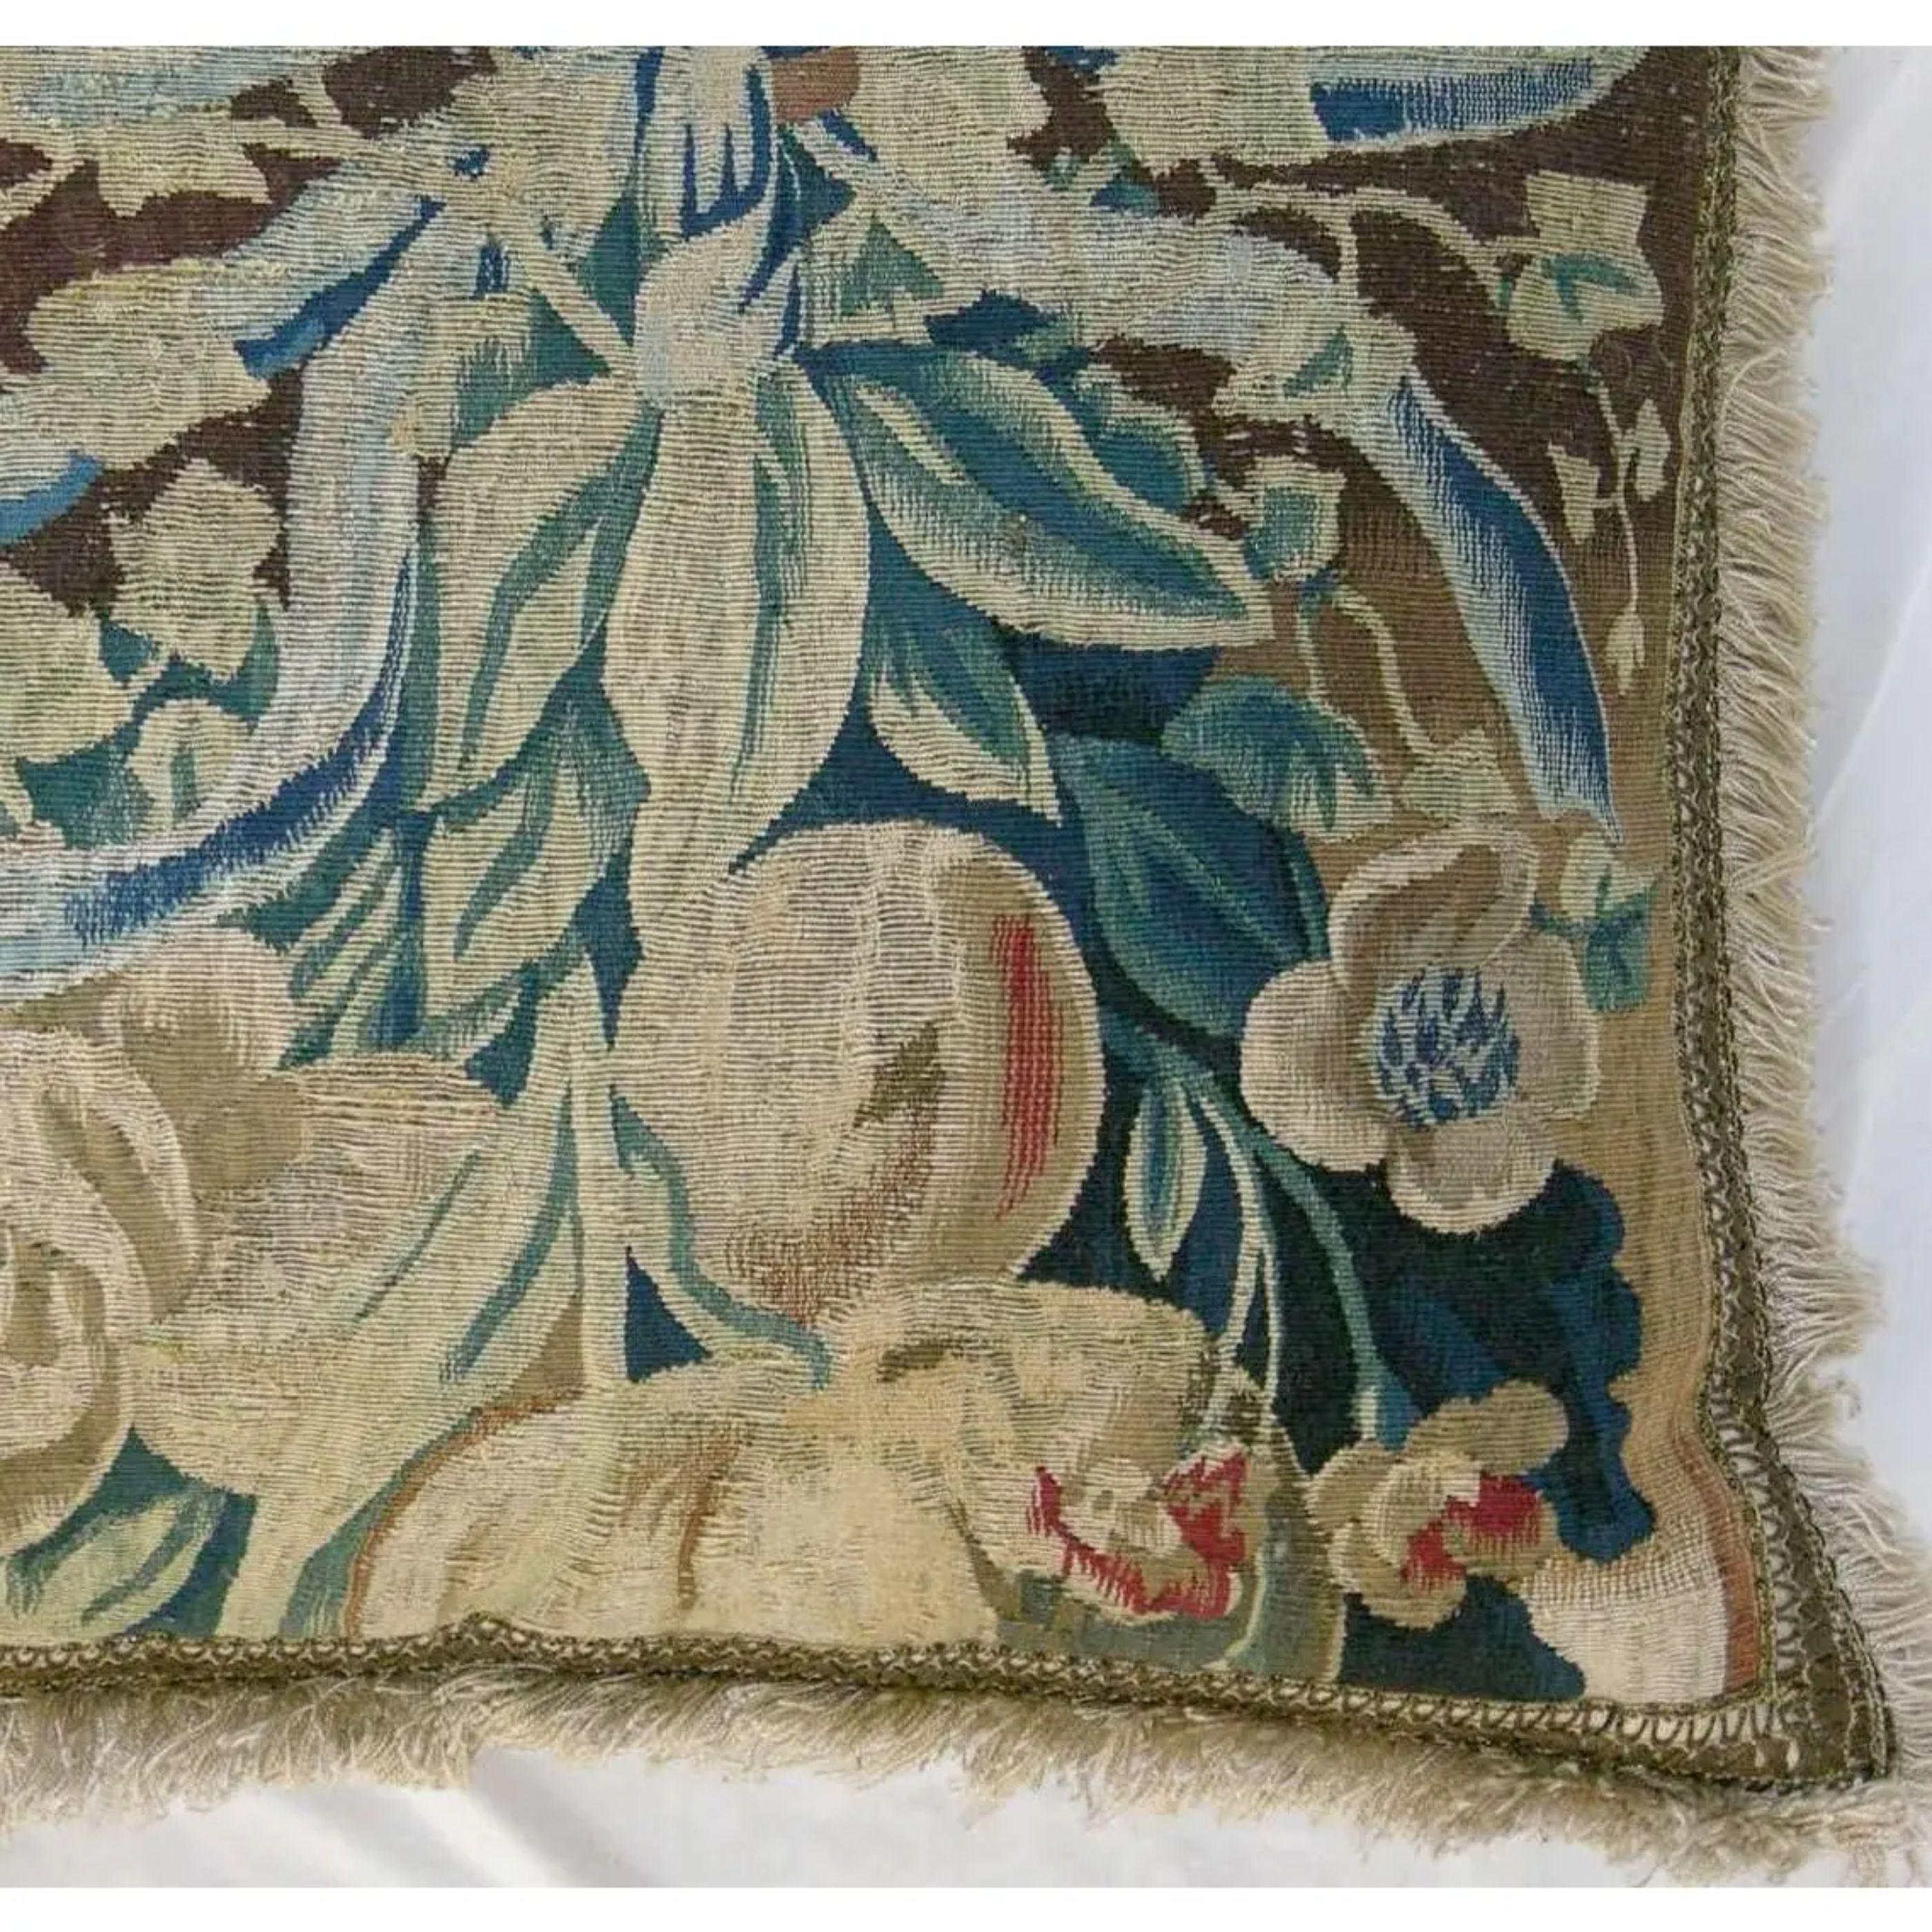 Antique Brussels Tapestry pillow, 23